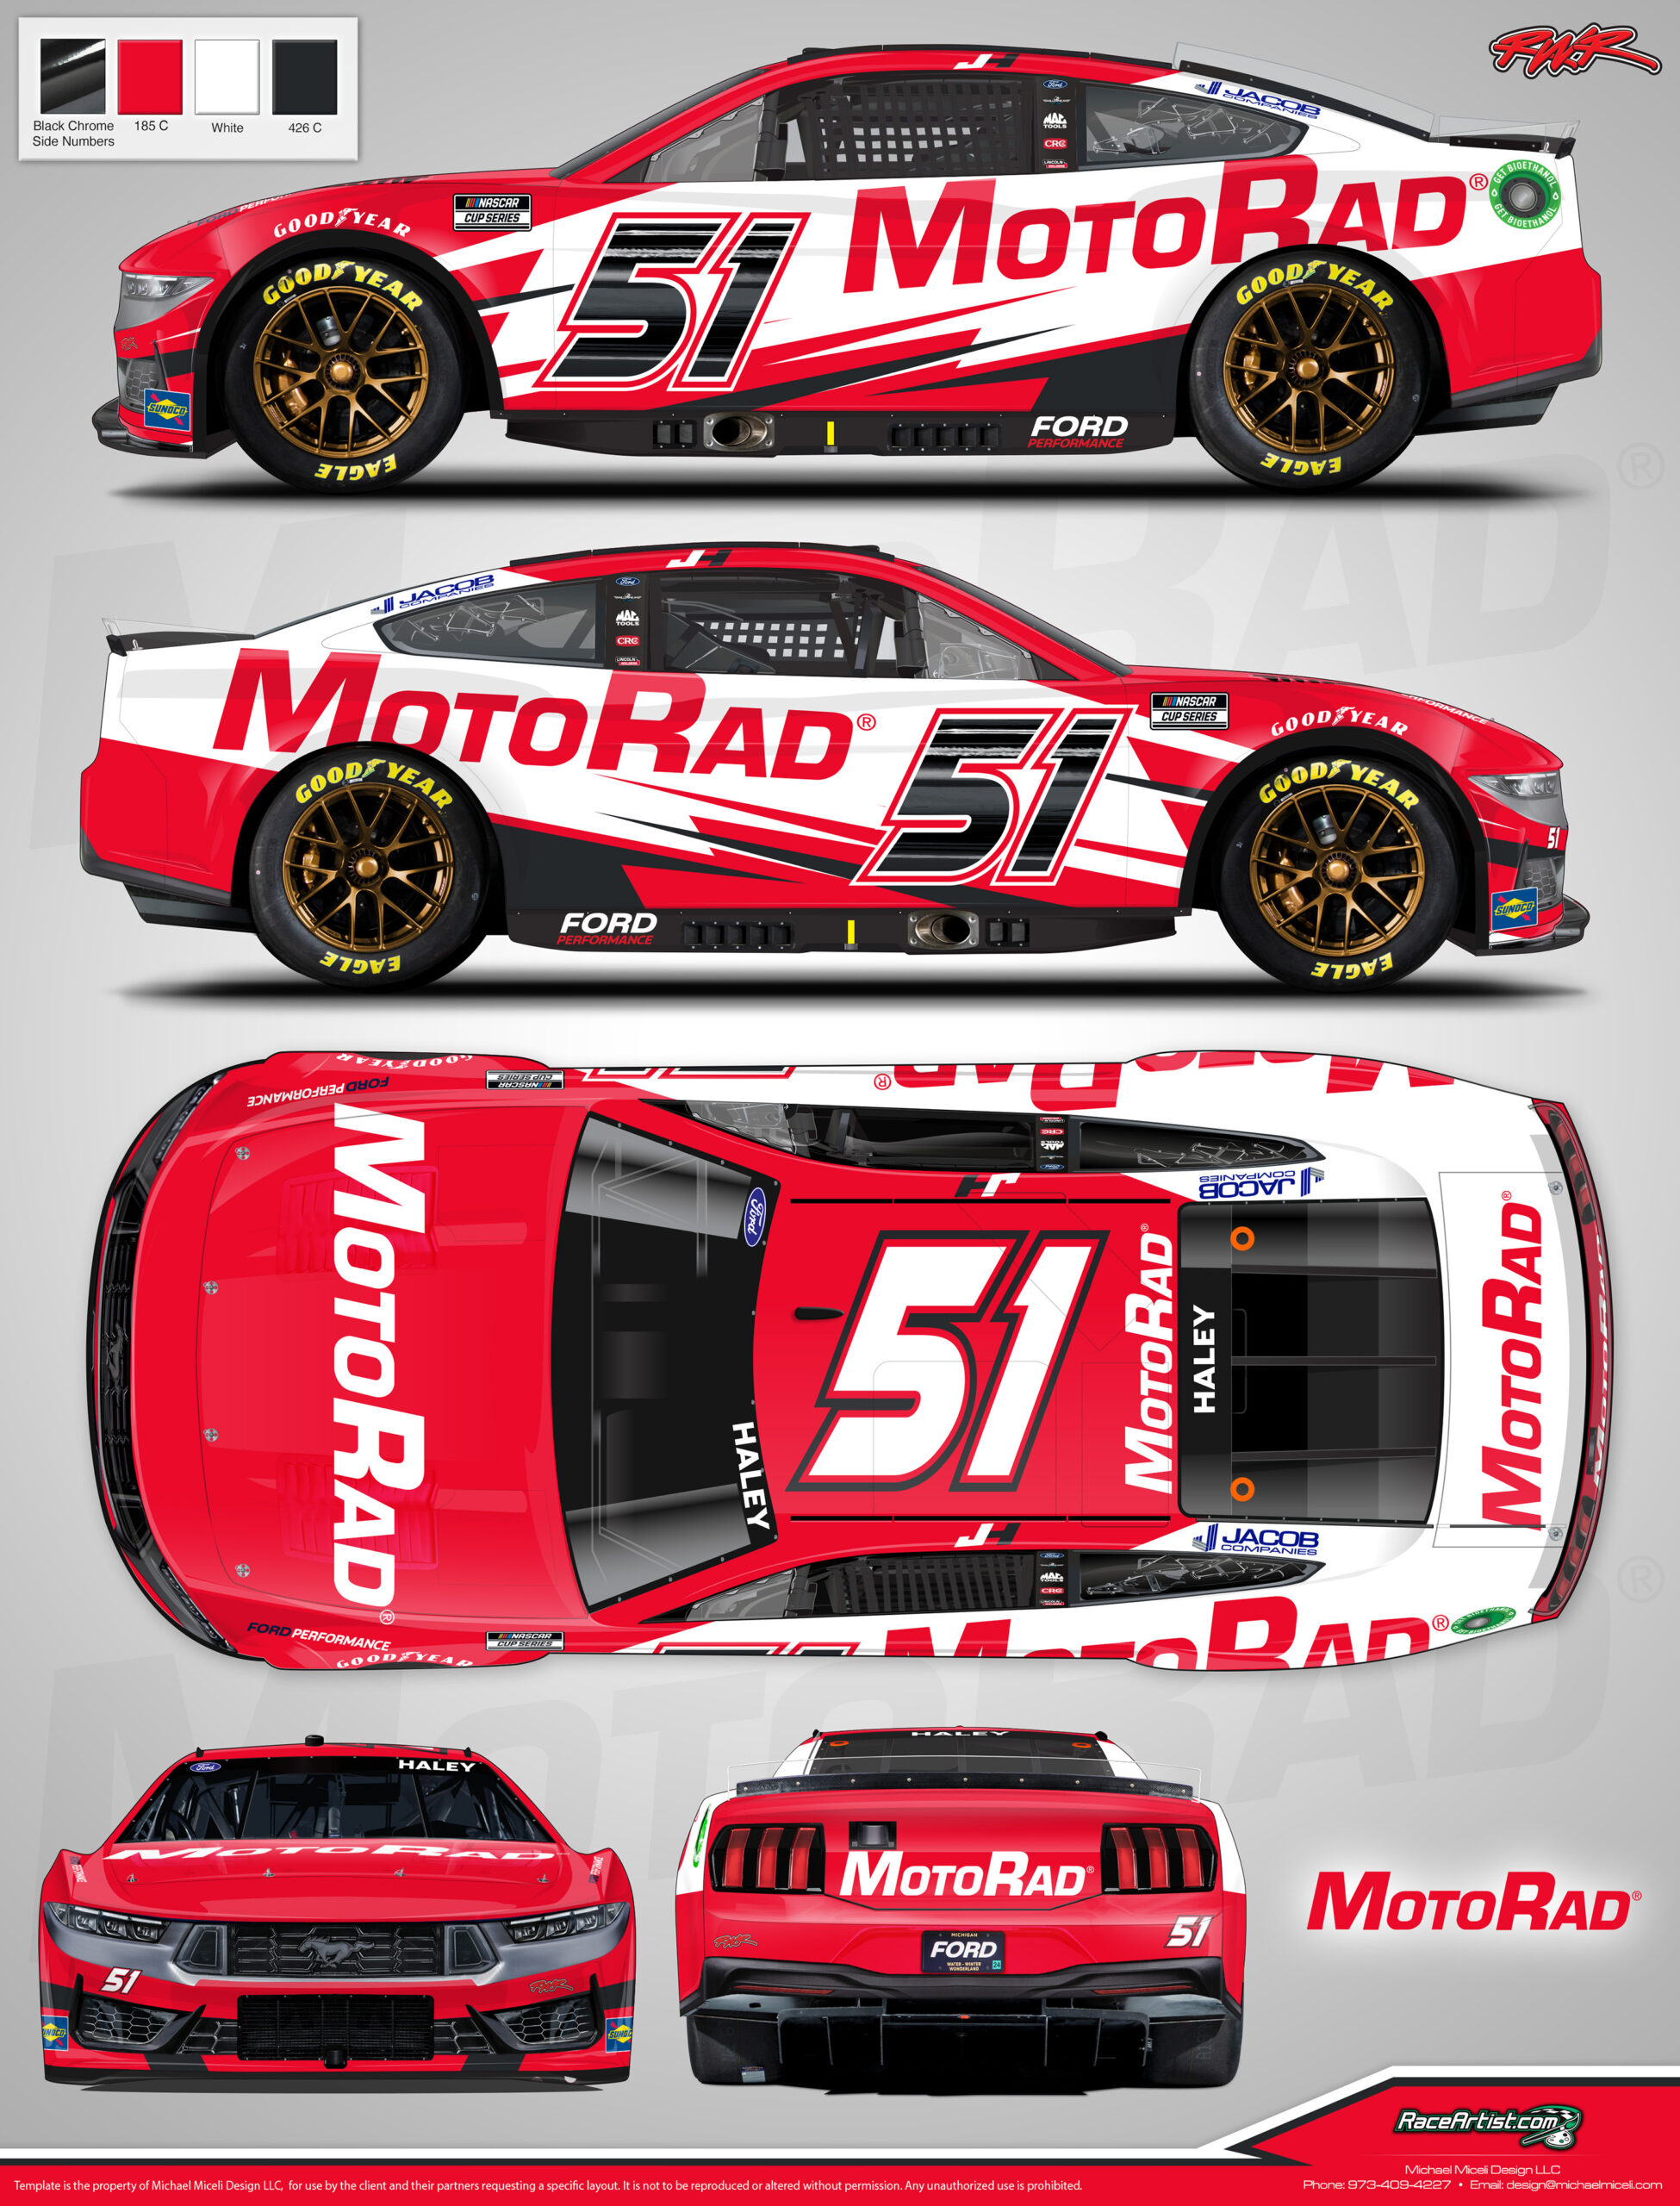 Rick Ware Racing and Justin Haley will Race with MotoRad Brand at Iowa Speedway Race on June 16th